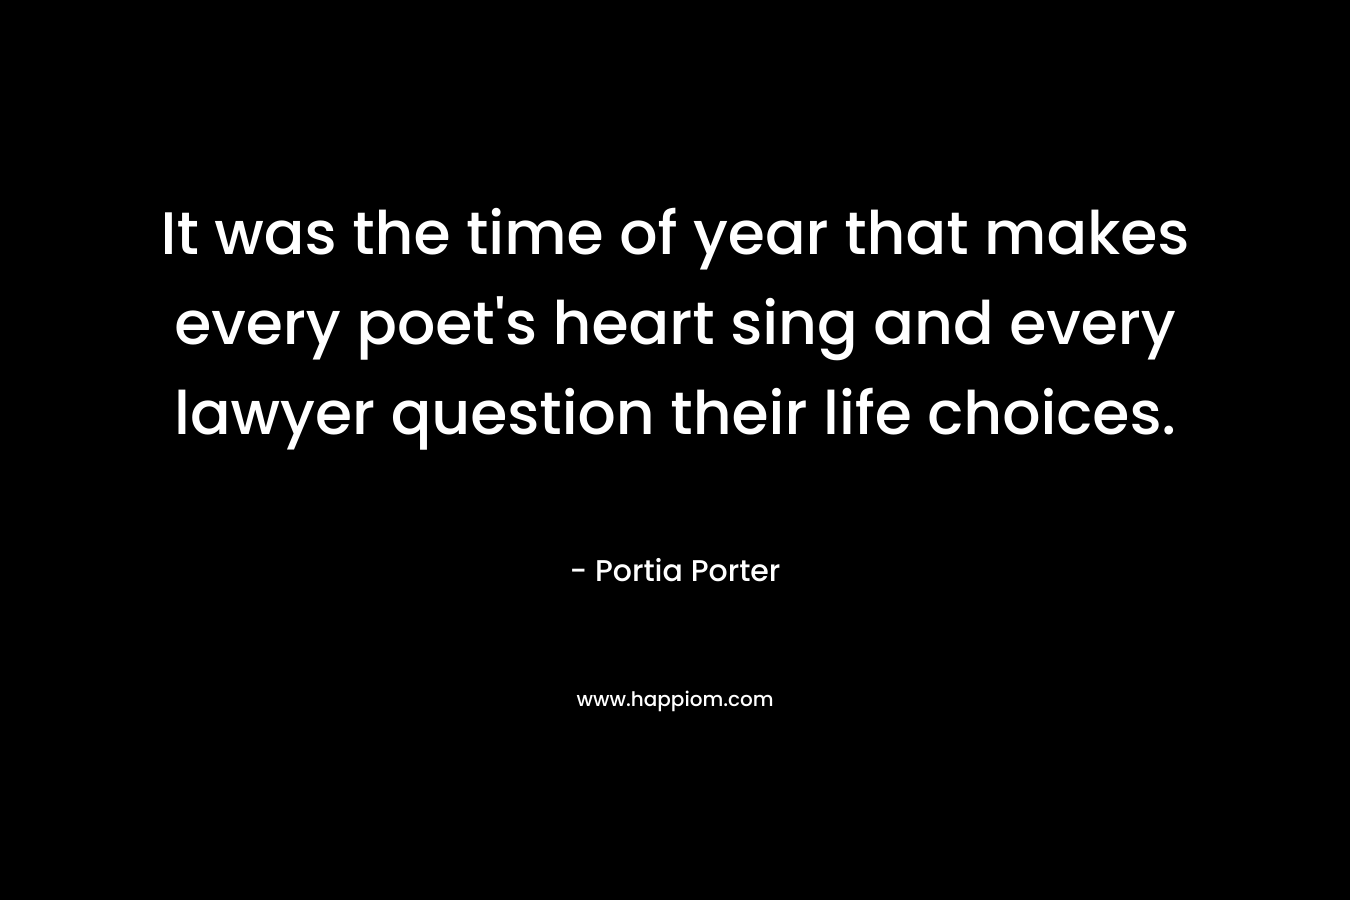 It was the time of year that makes every poet’s heart sing and every lawyer question their life choices. – Portia Porter